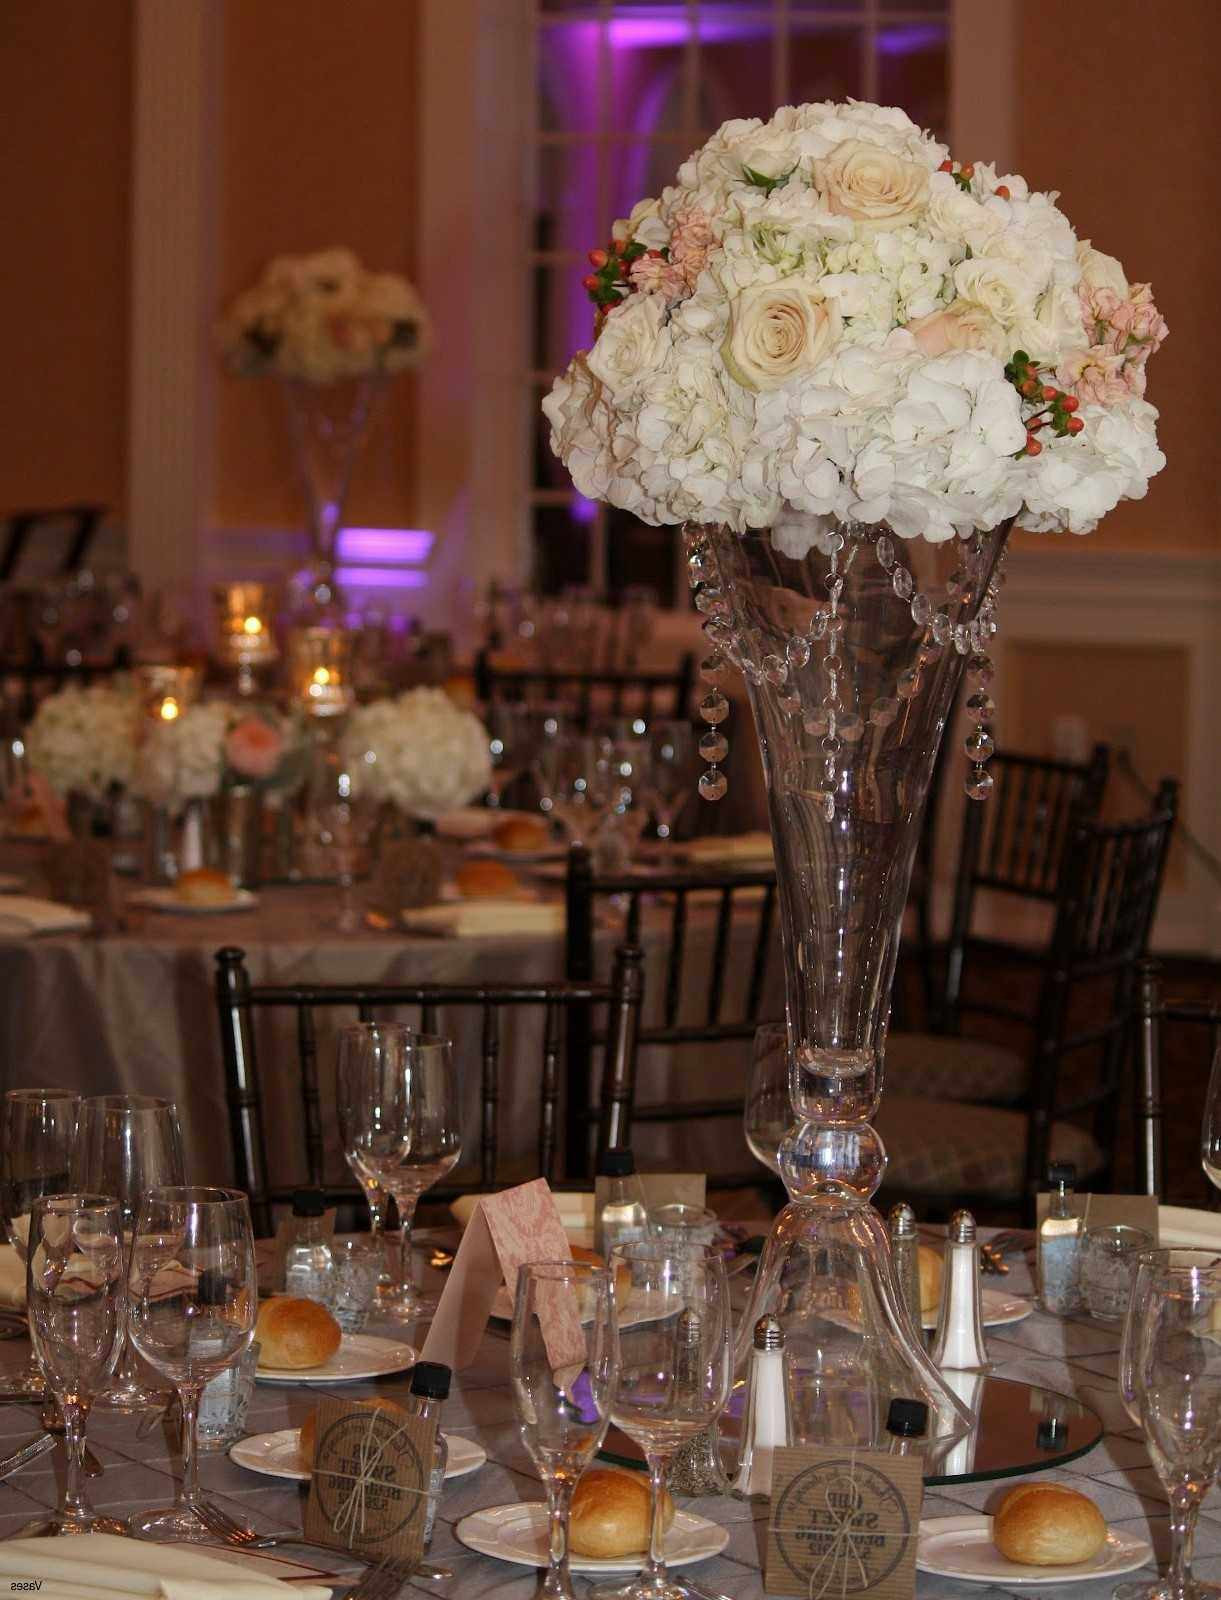 11 Stylish Tall White Vases for Wedding Centerpieces 2024 free download tall white vases for wedding centerpieces of 60 fresh cheap wedding decorations for tables a anna wedding regarding vases wedding centerpiece cheap tall vase centerpieces reception table wit